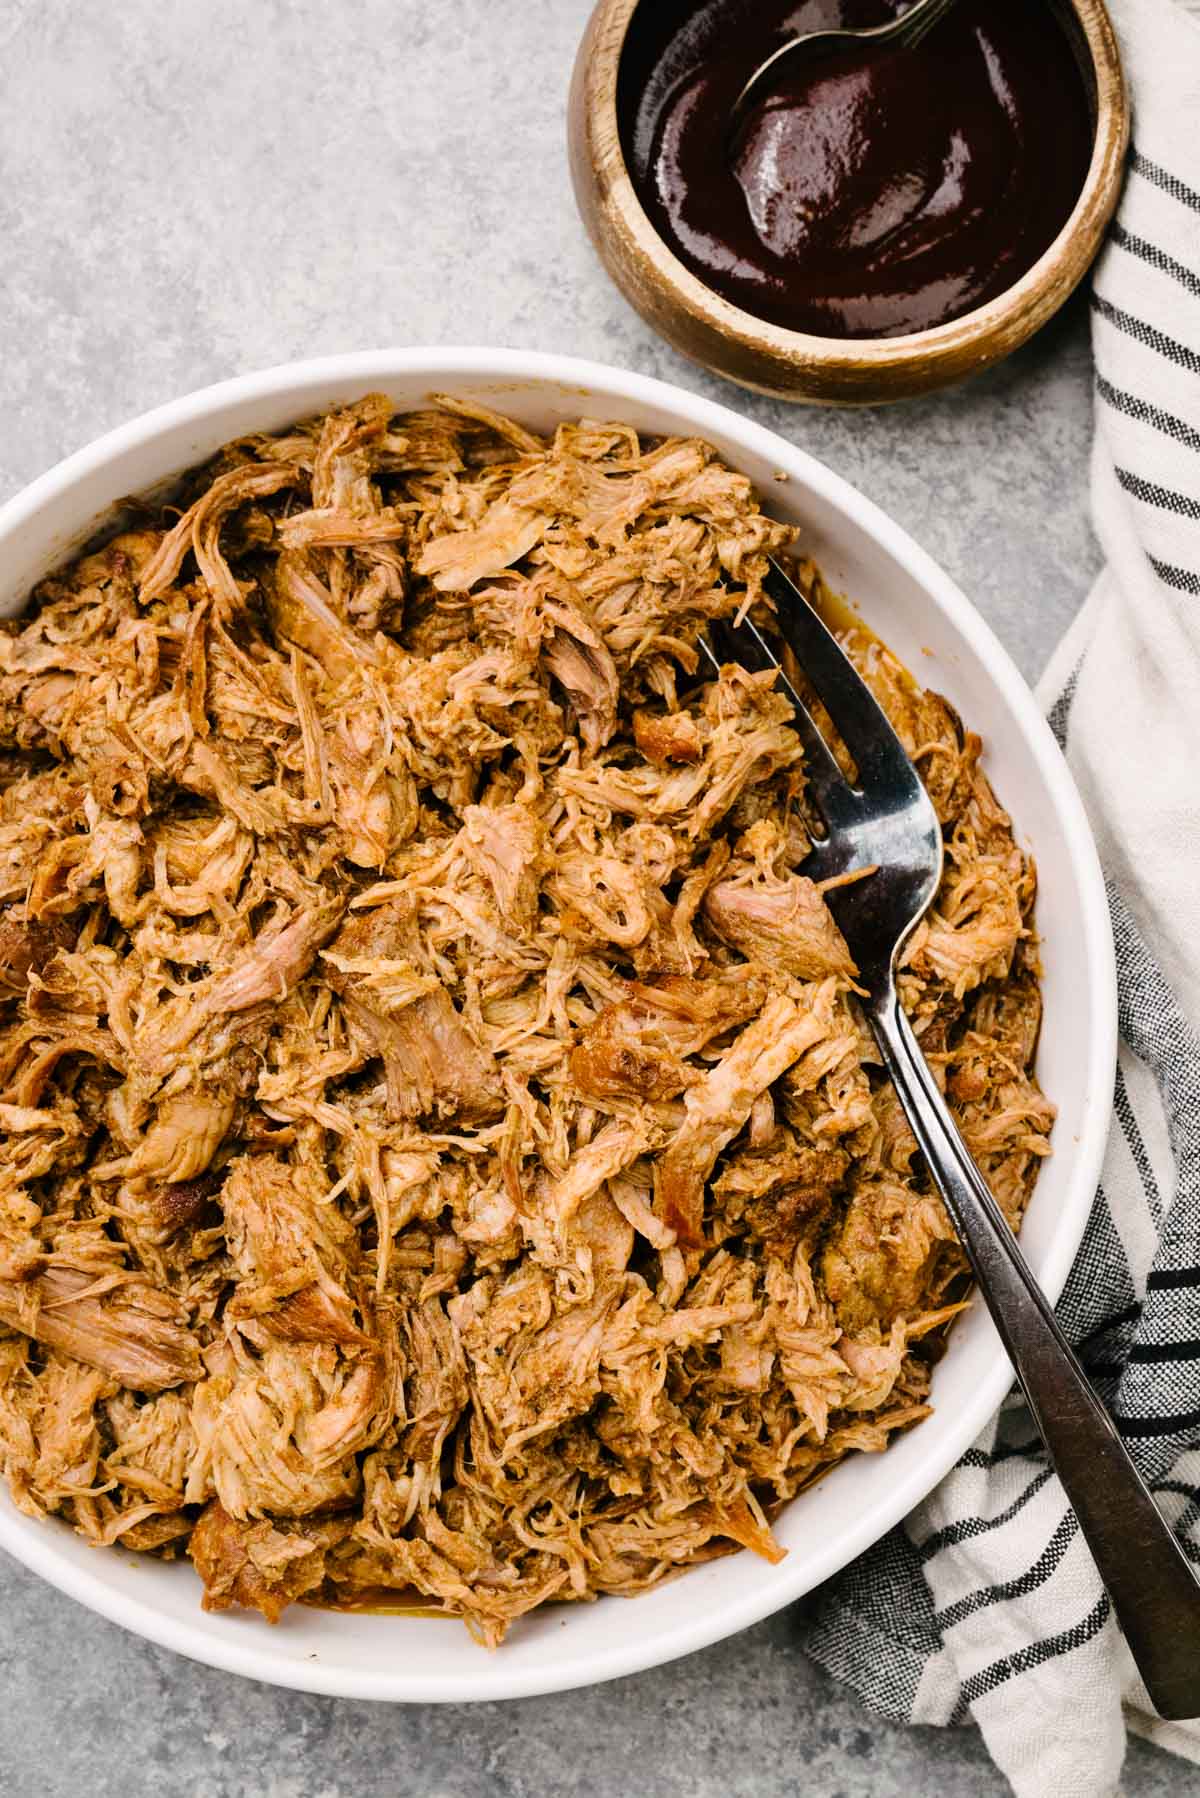 A serving fork tucked into a large white bowl of crockpot pulled pork; a bowl of barbecue sauce and striped linen napkin surround the bowl.